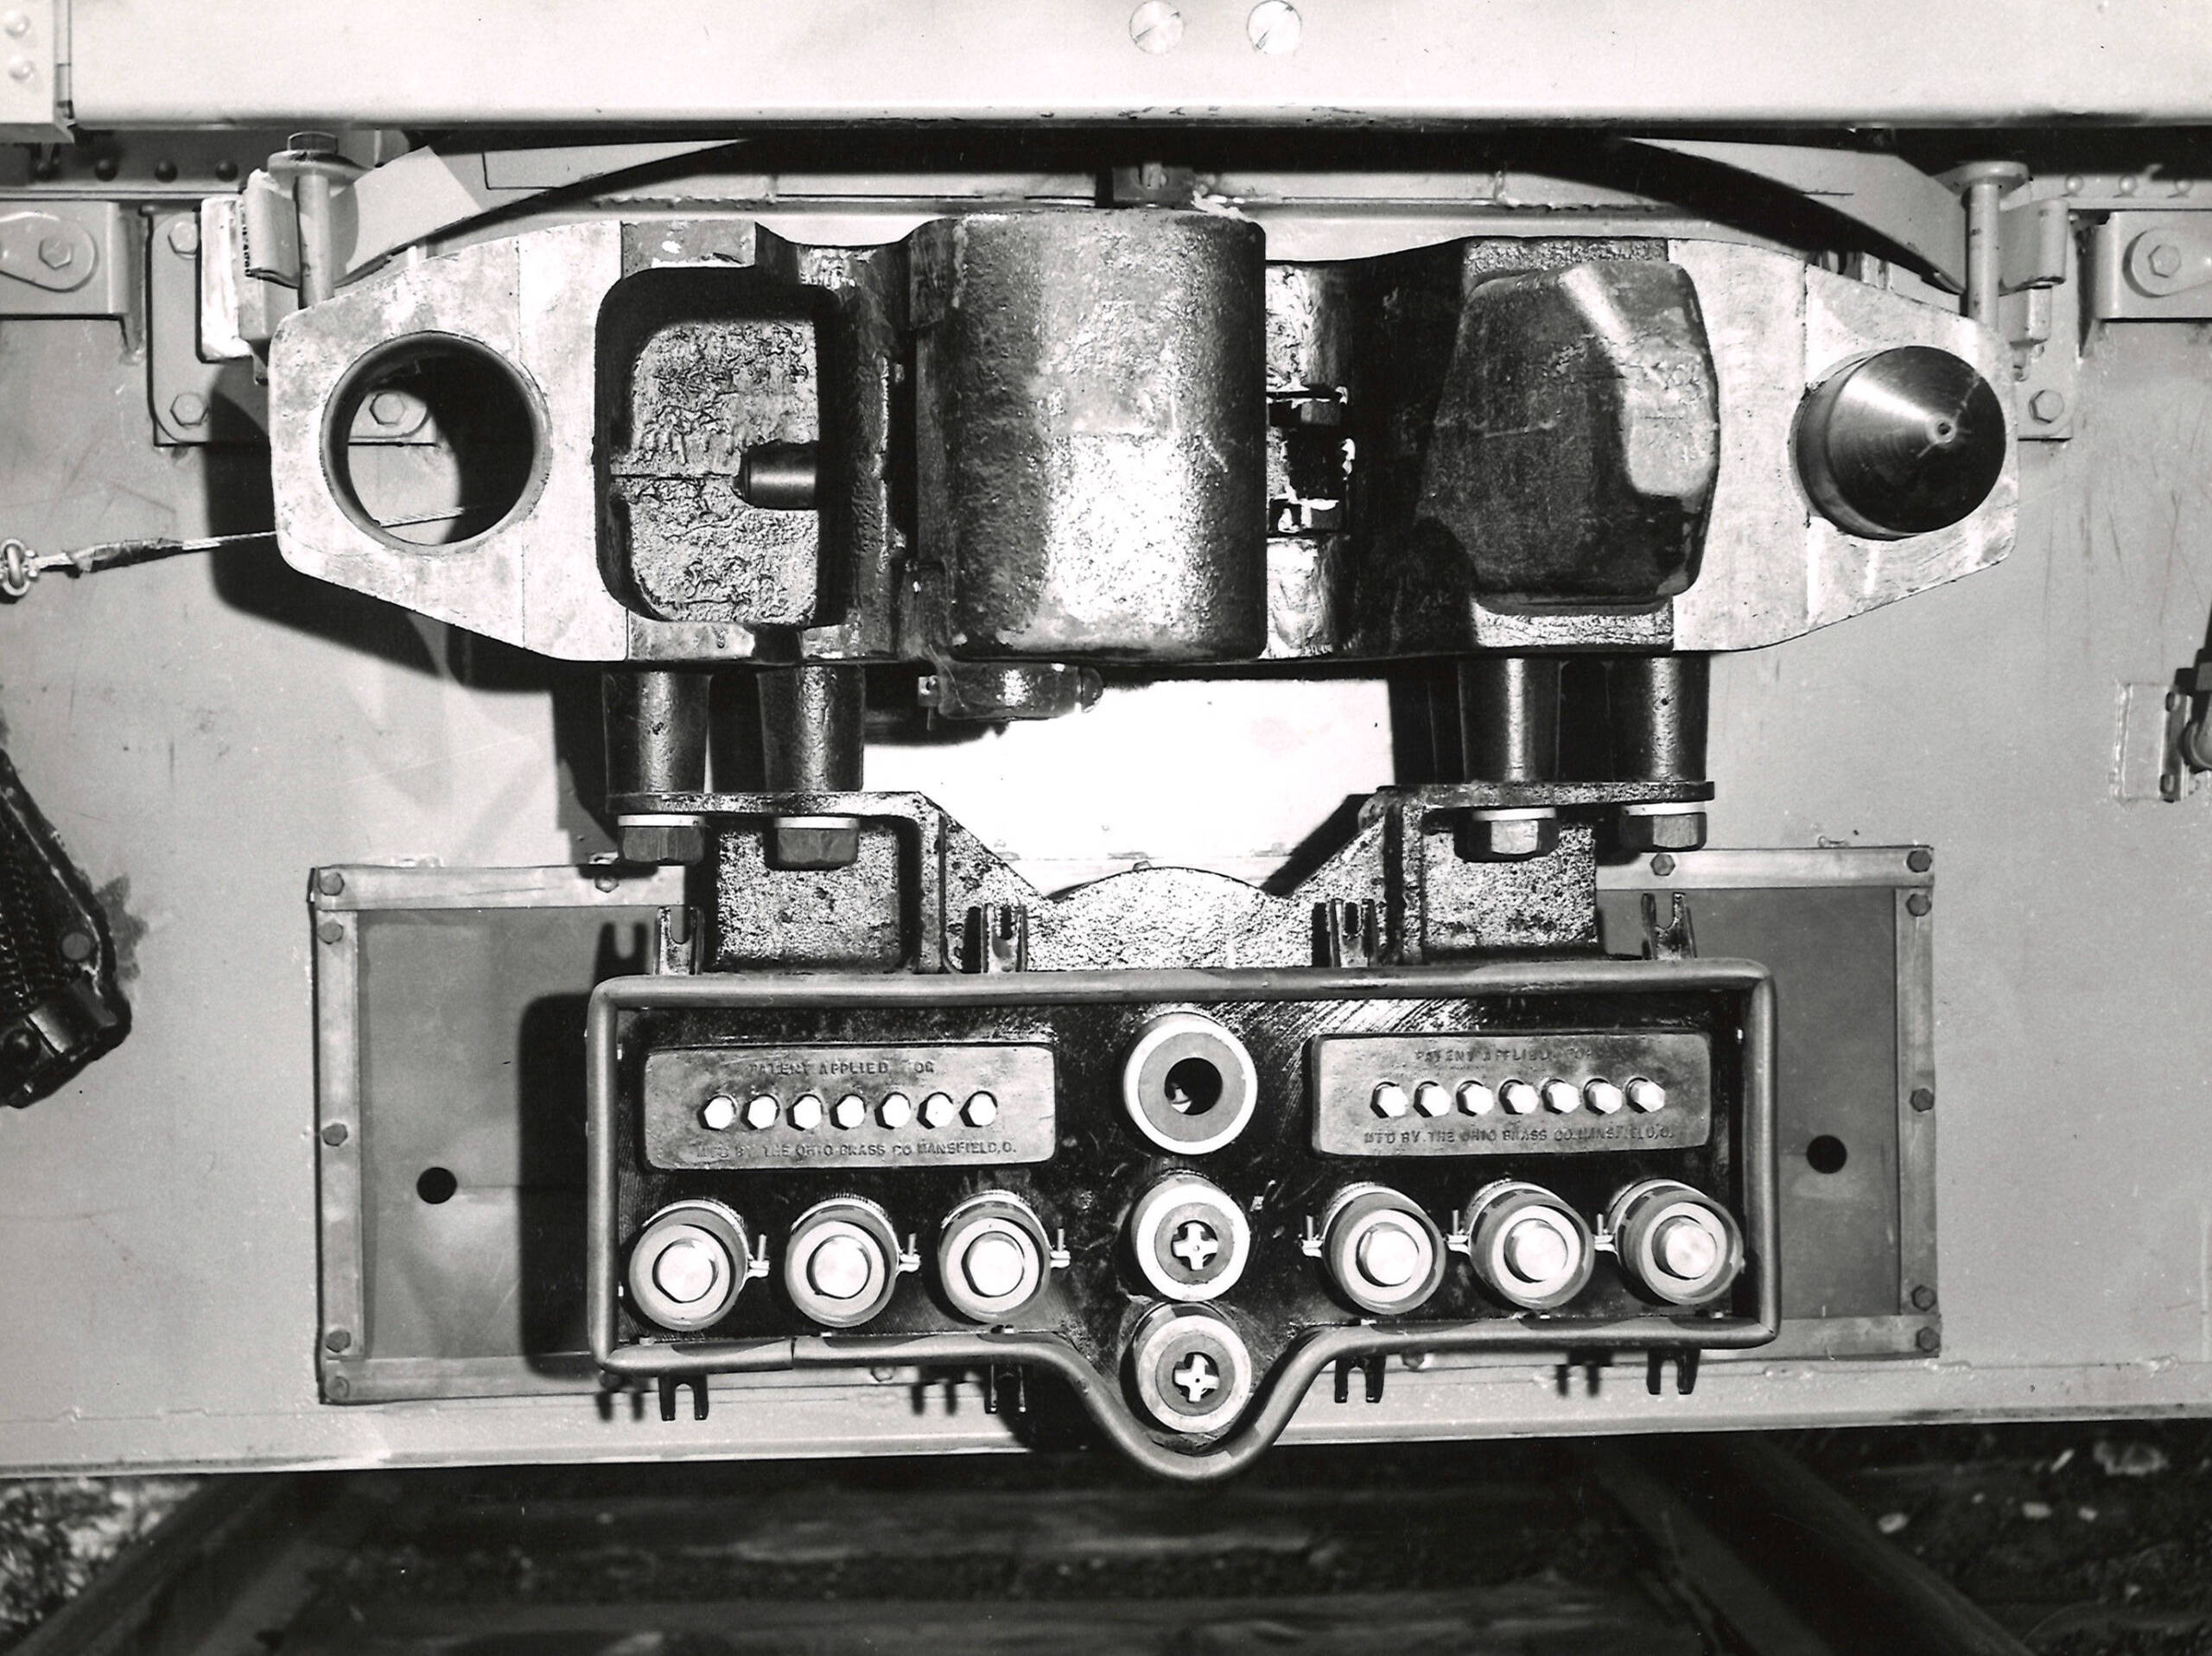 Train coupler with alignment pins and special connections for air and electricity.